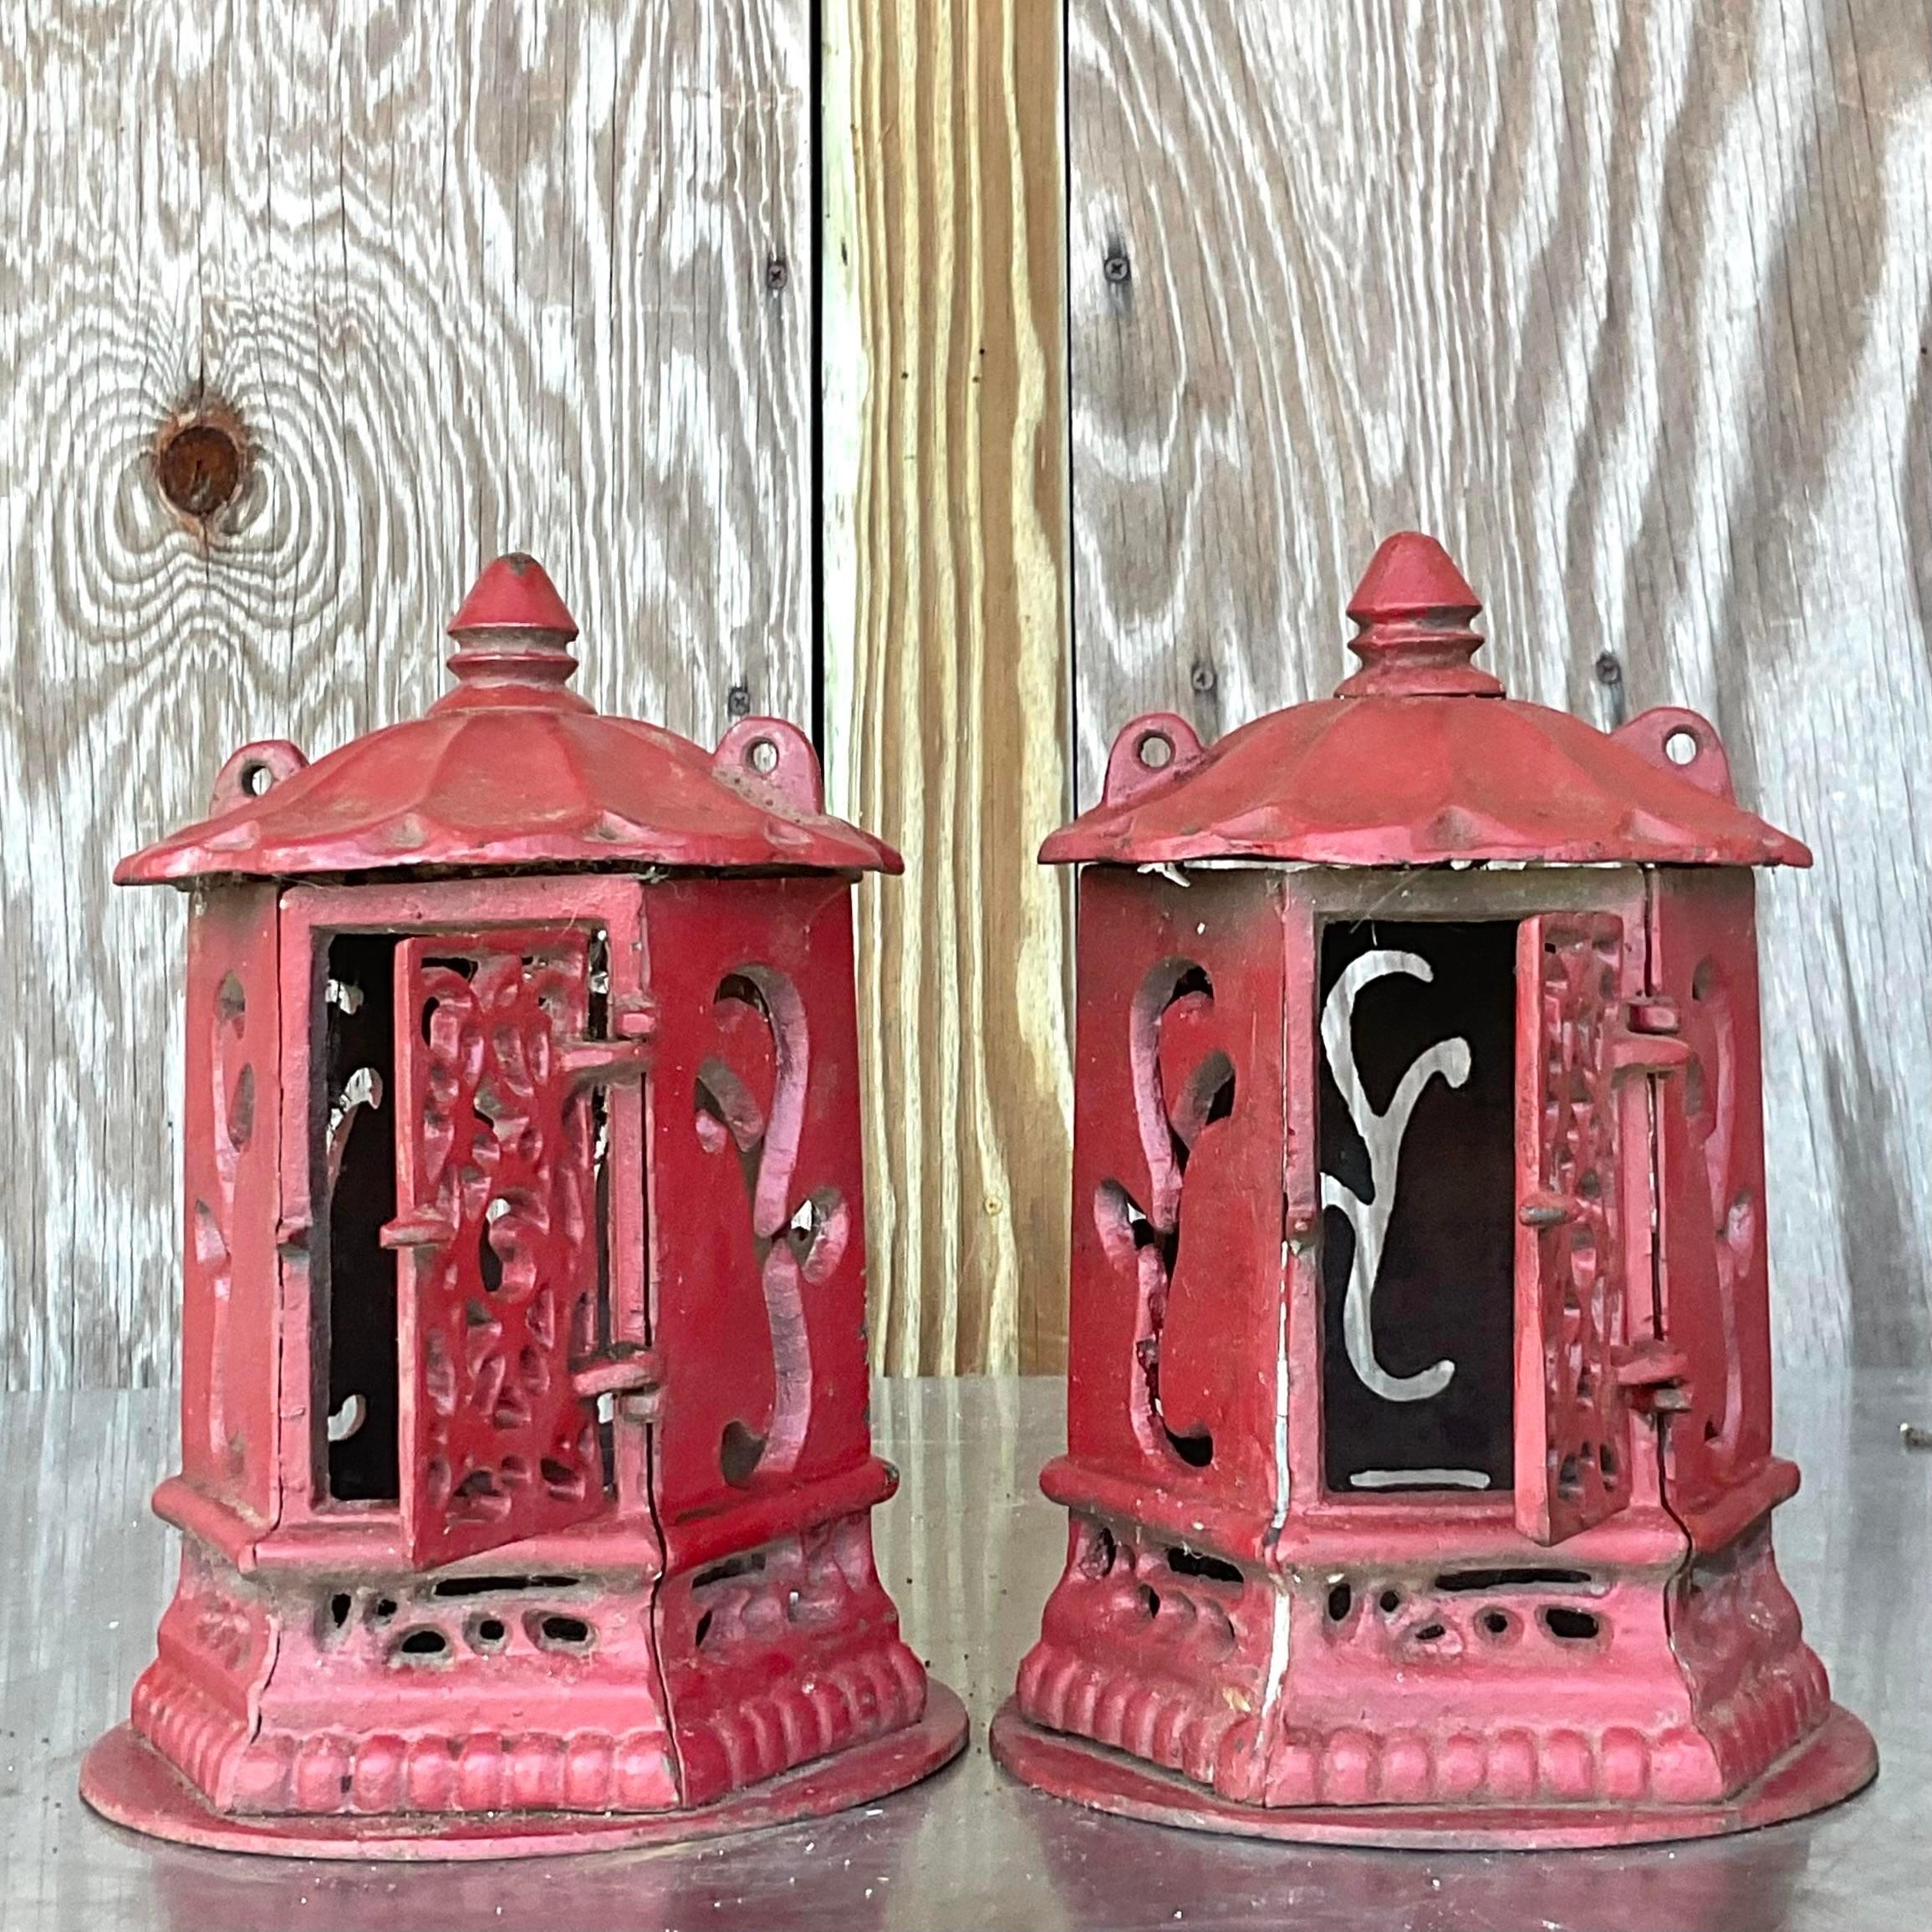 A fabulous pair of vintage MCM outdoor lanterns. A chic Asian pagoda design made in wrought iron. Painted a deep red that has mellowed over time to a fabulous shade. Acquired from a Palm Beach estate.